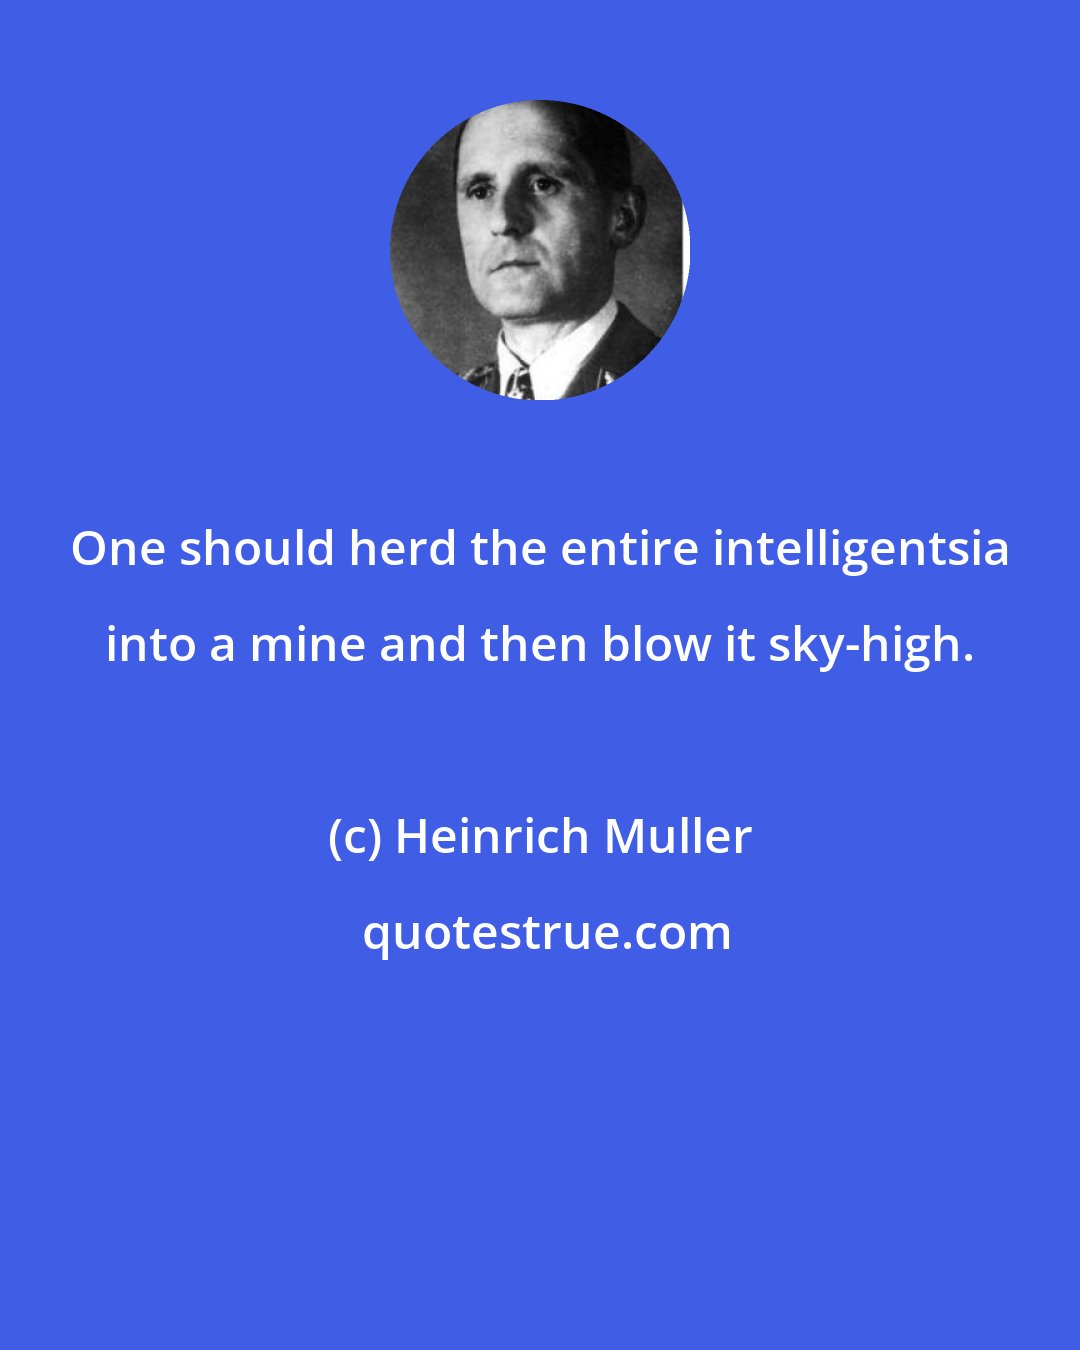 Heinrich Muller: One should herd the entire intelligentsia into a mine and then blow it sky-high.